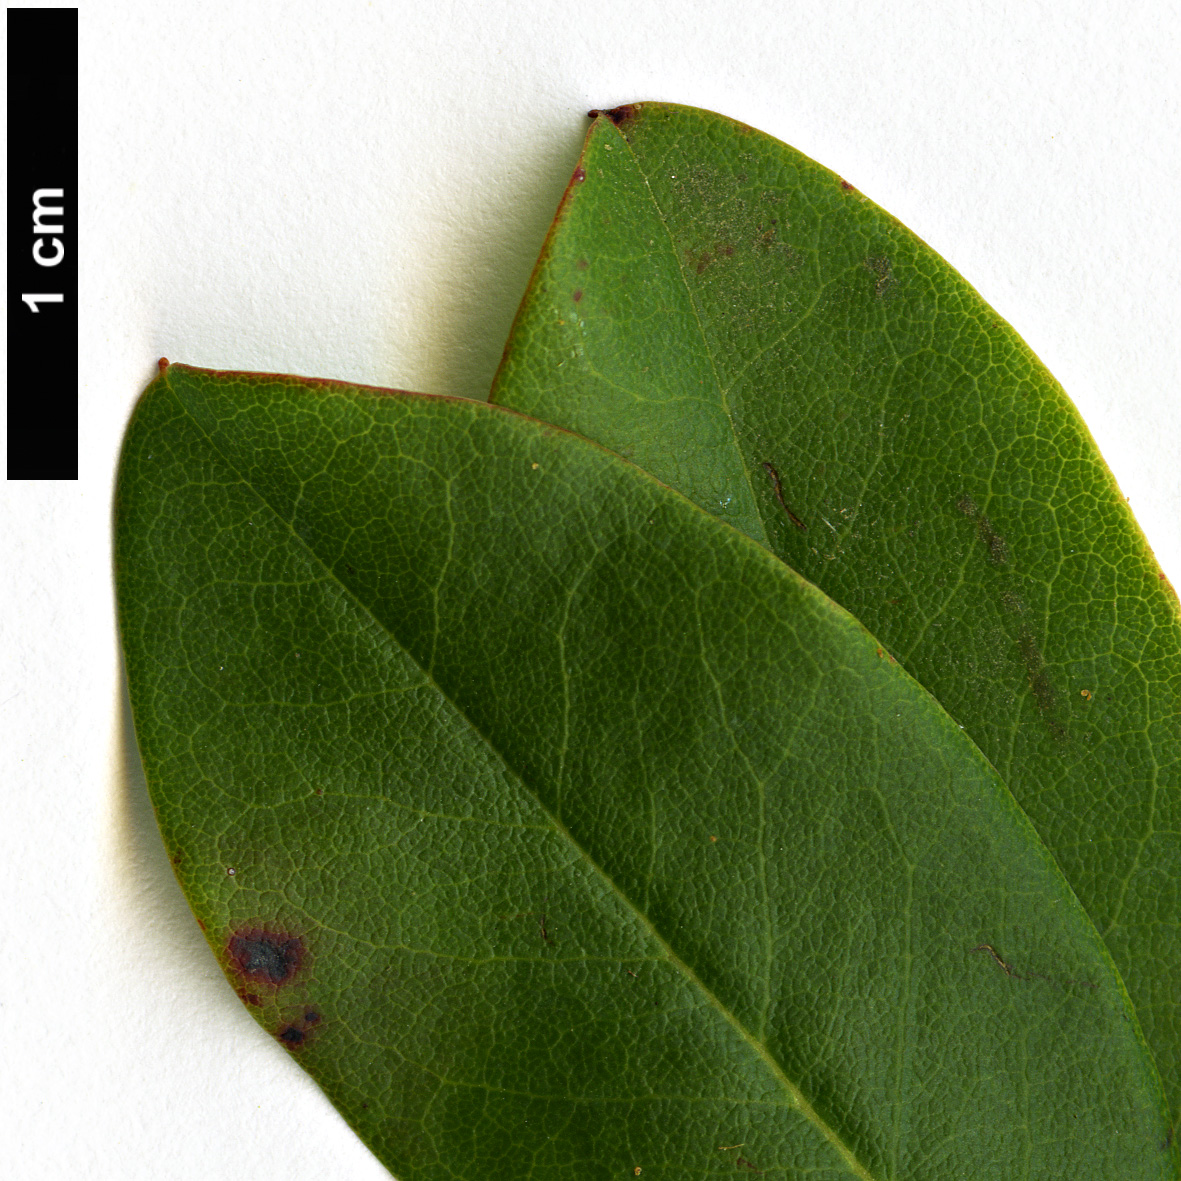 High resolution image: Family: Ericaceae - Genus: Rhododendron - Taxon: viridescens 